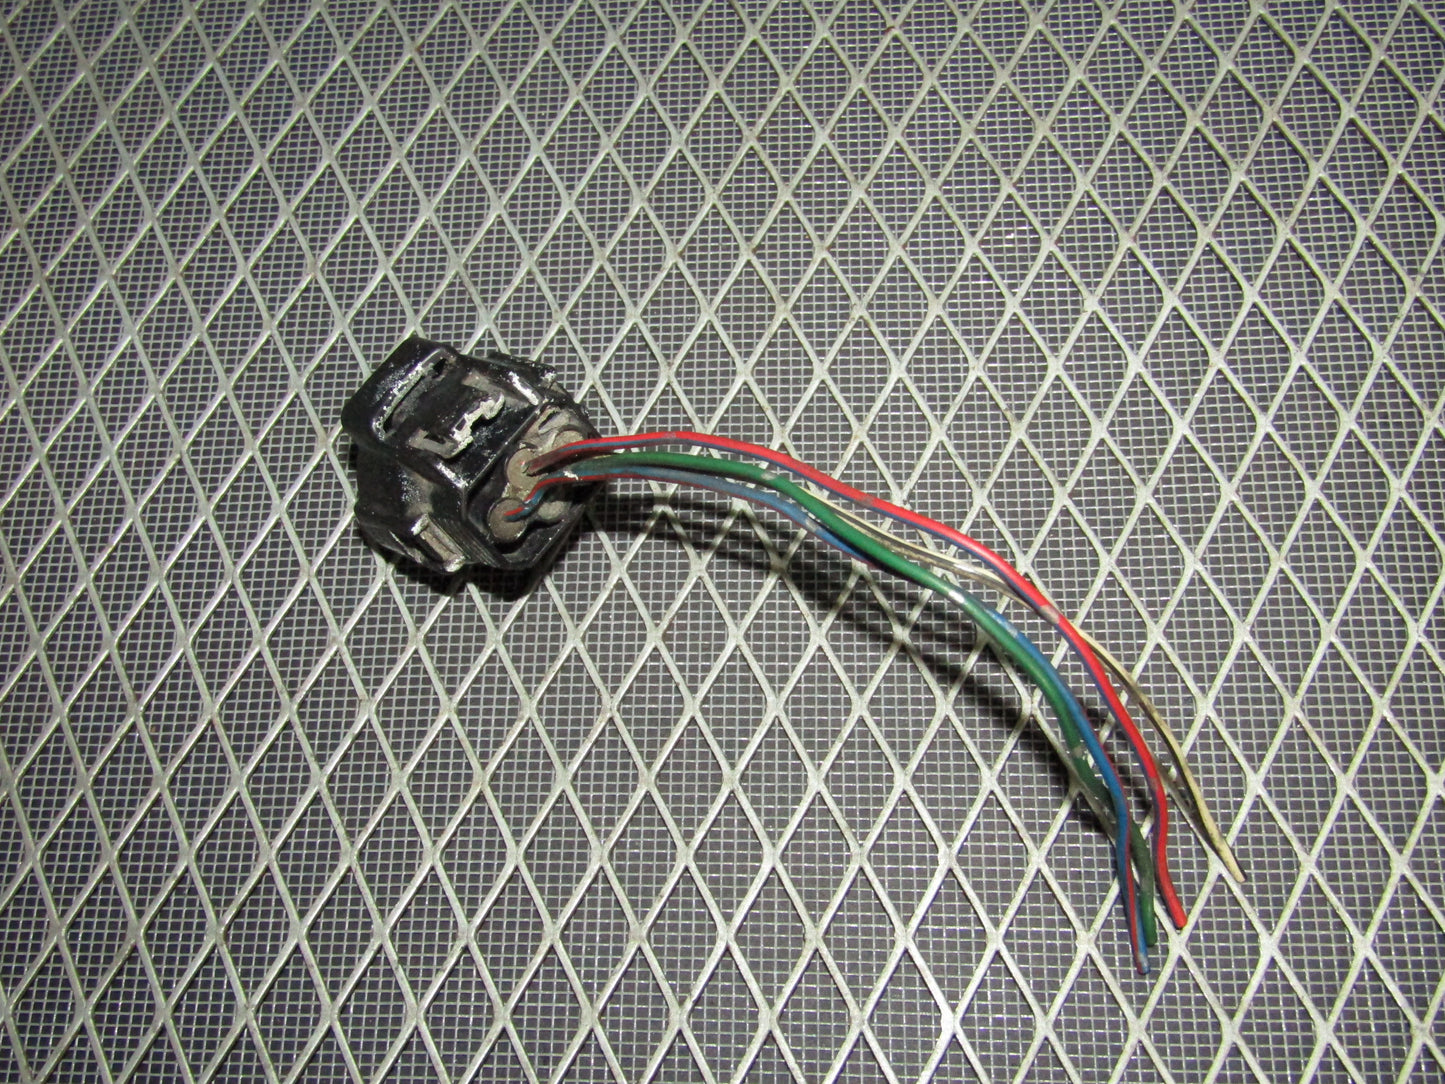 92-93 Toyota Camry OEM A/C Pressure Switch Pigtail Harness - 3VZ-FE V6 3.0L